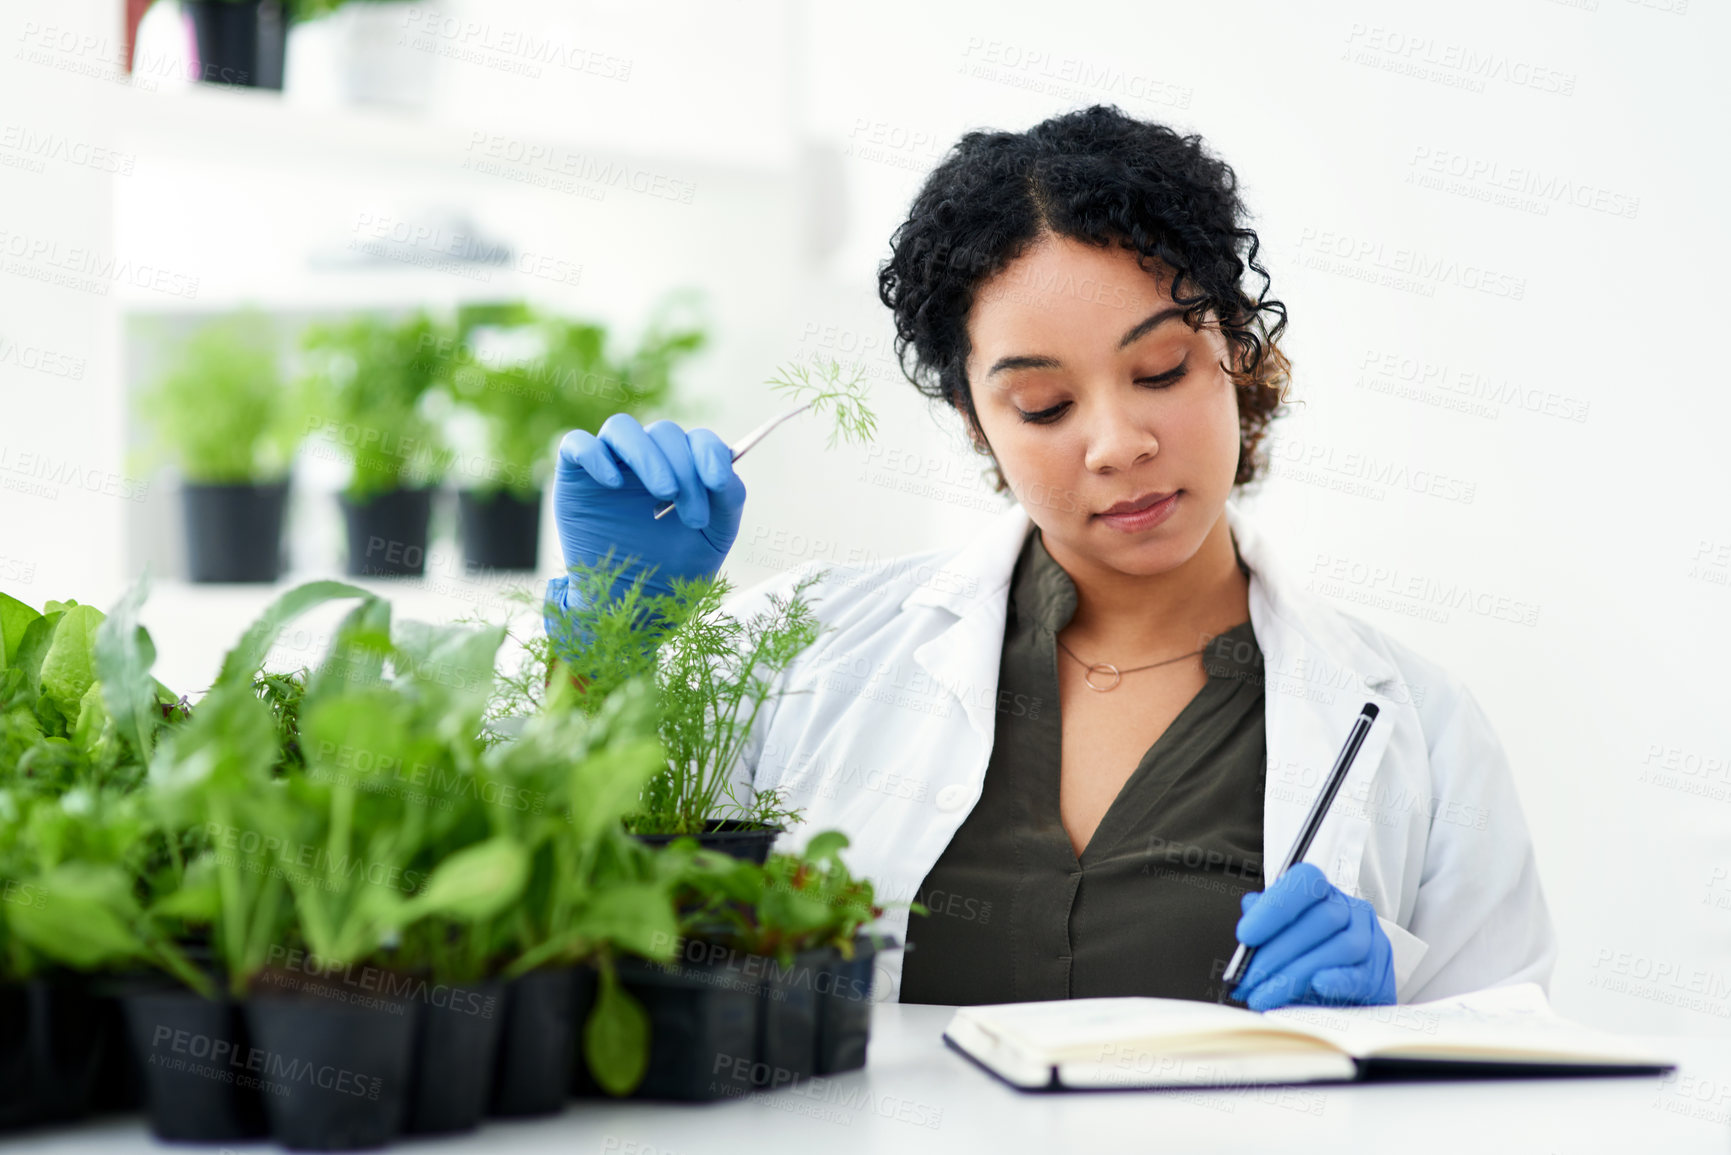 Buy stock photo Cropped shot of a female scientist making notes while analyzing a plant